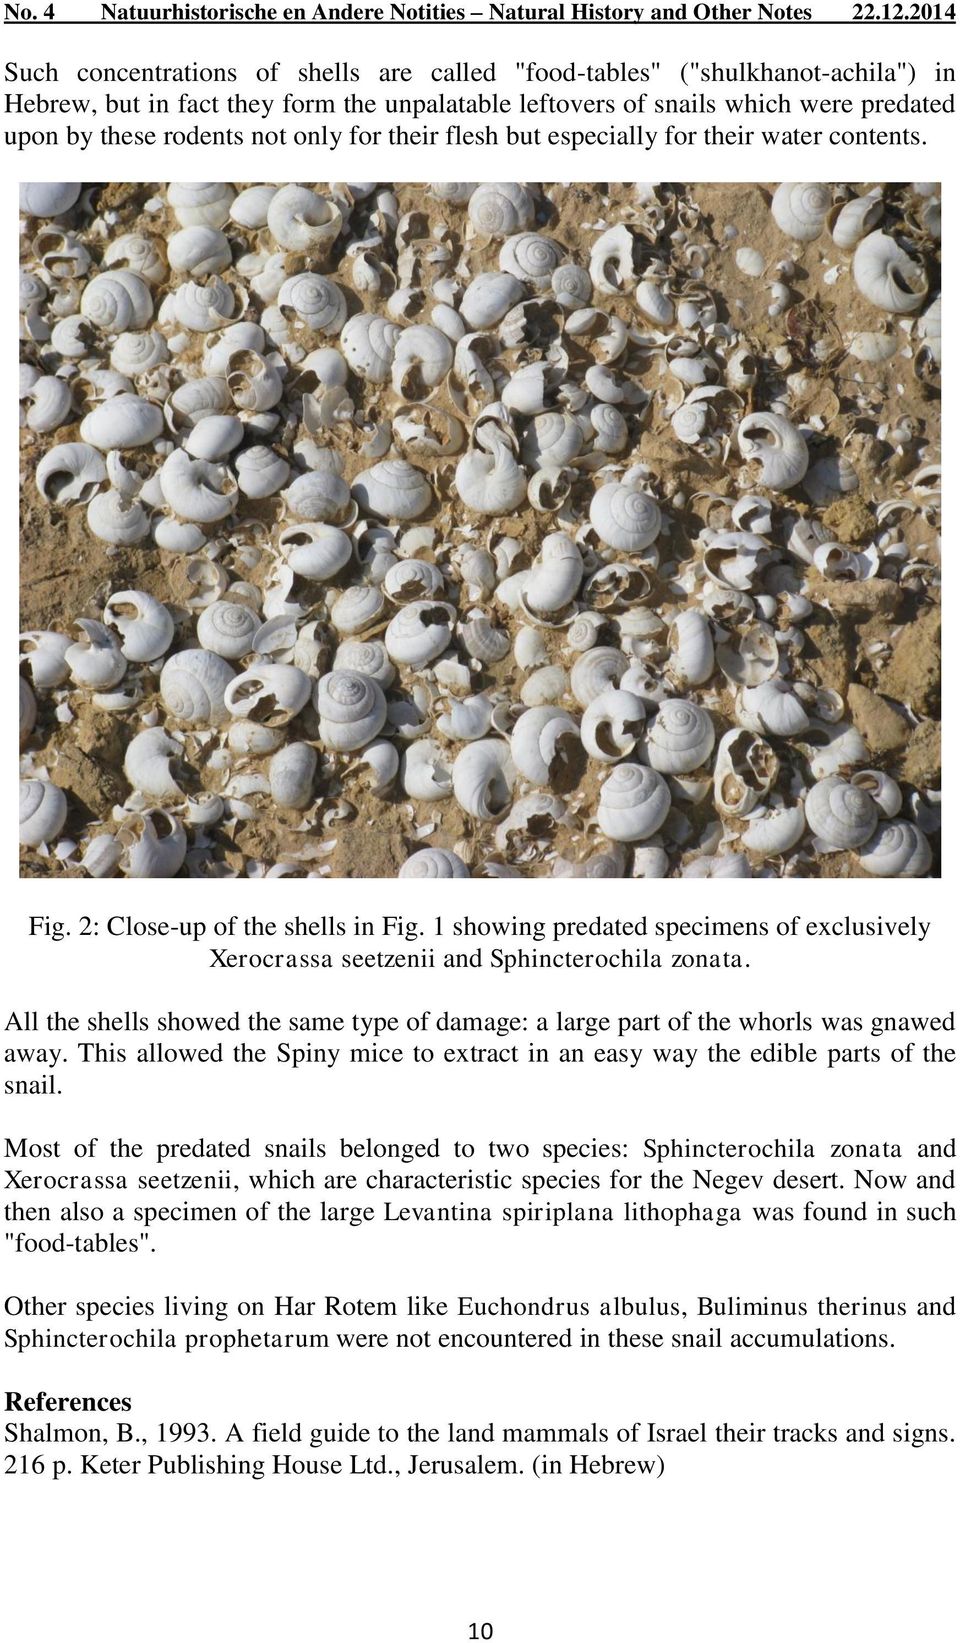 All the shells showed the same type of damage: a large part of the whorls was gnawed away. This allowed the Spiny mice to extract in an easy way the edible parts of the snail.